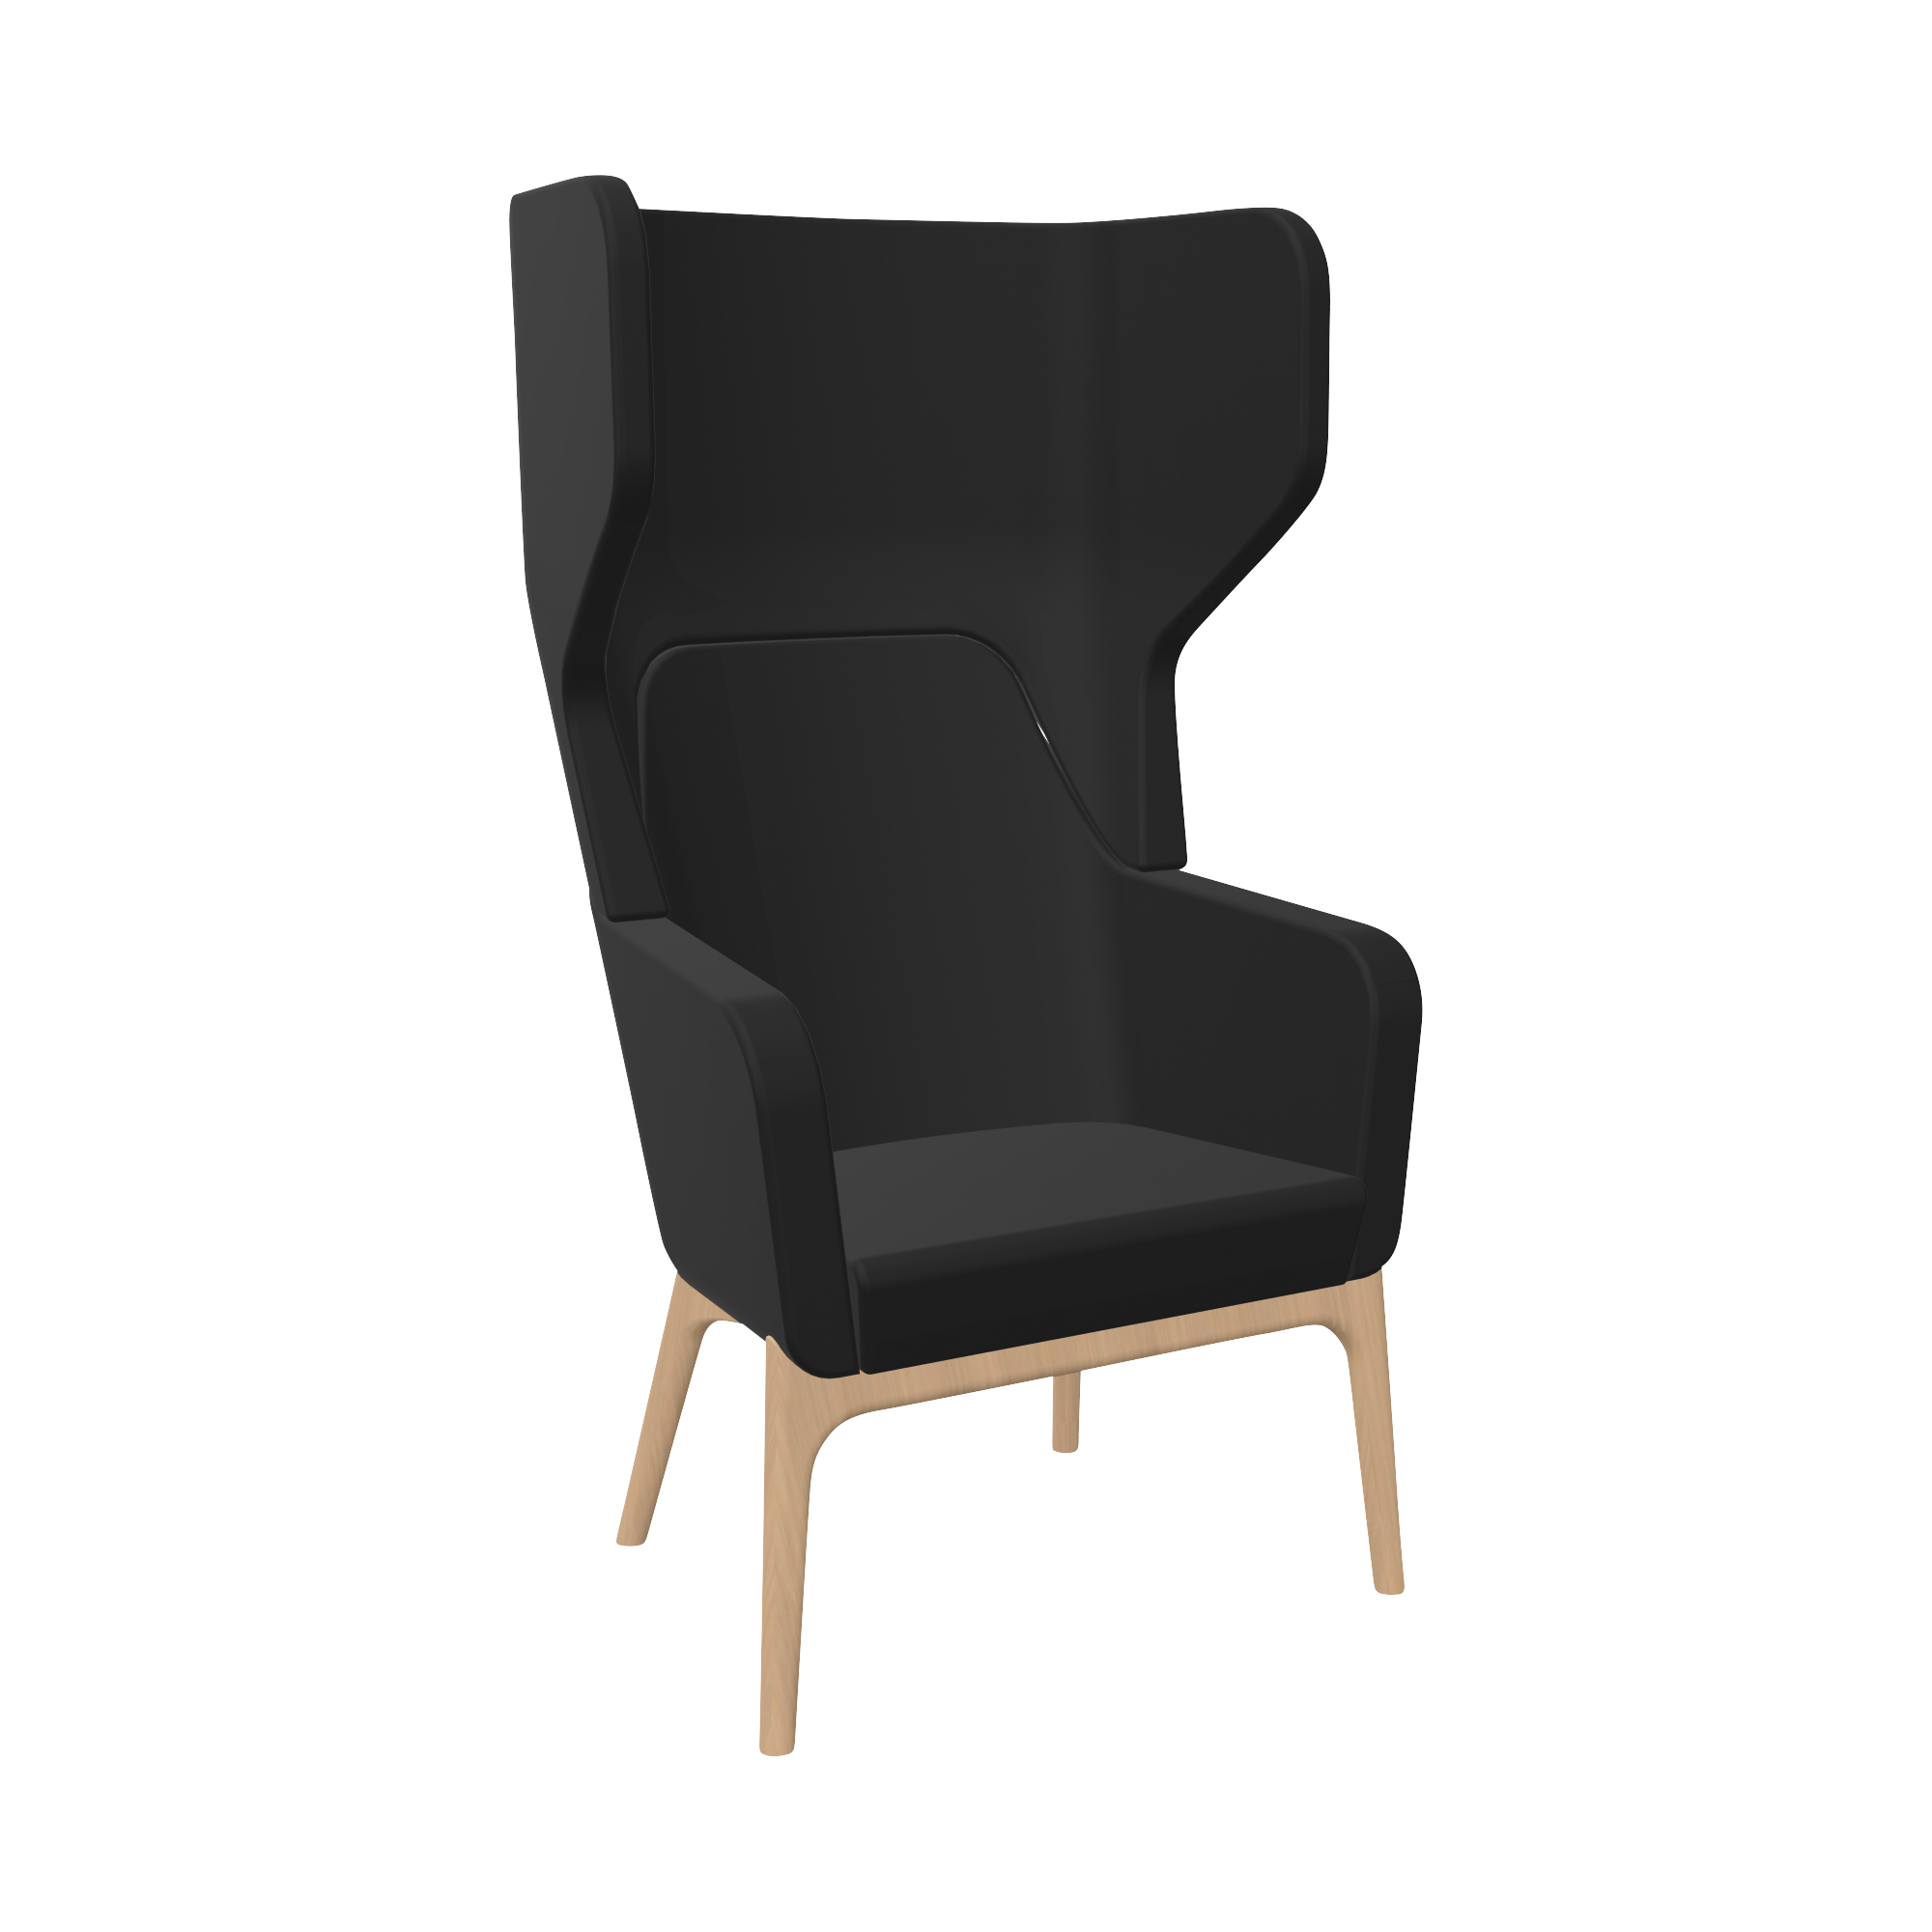 Black upholstered chair with high head back rest and four wooden legs